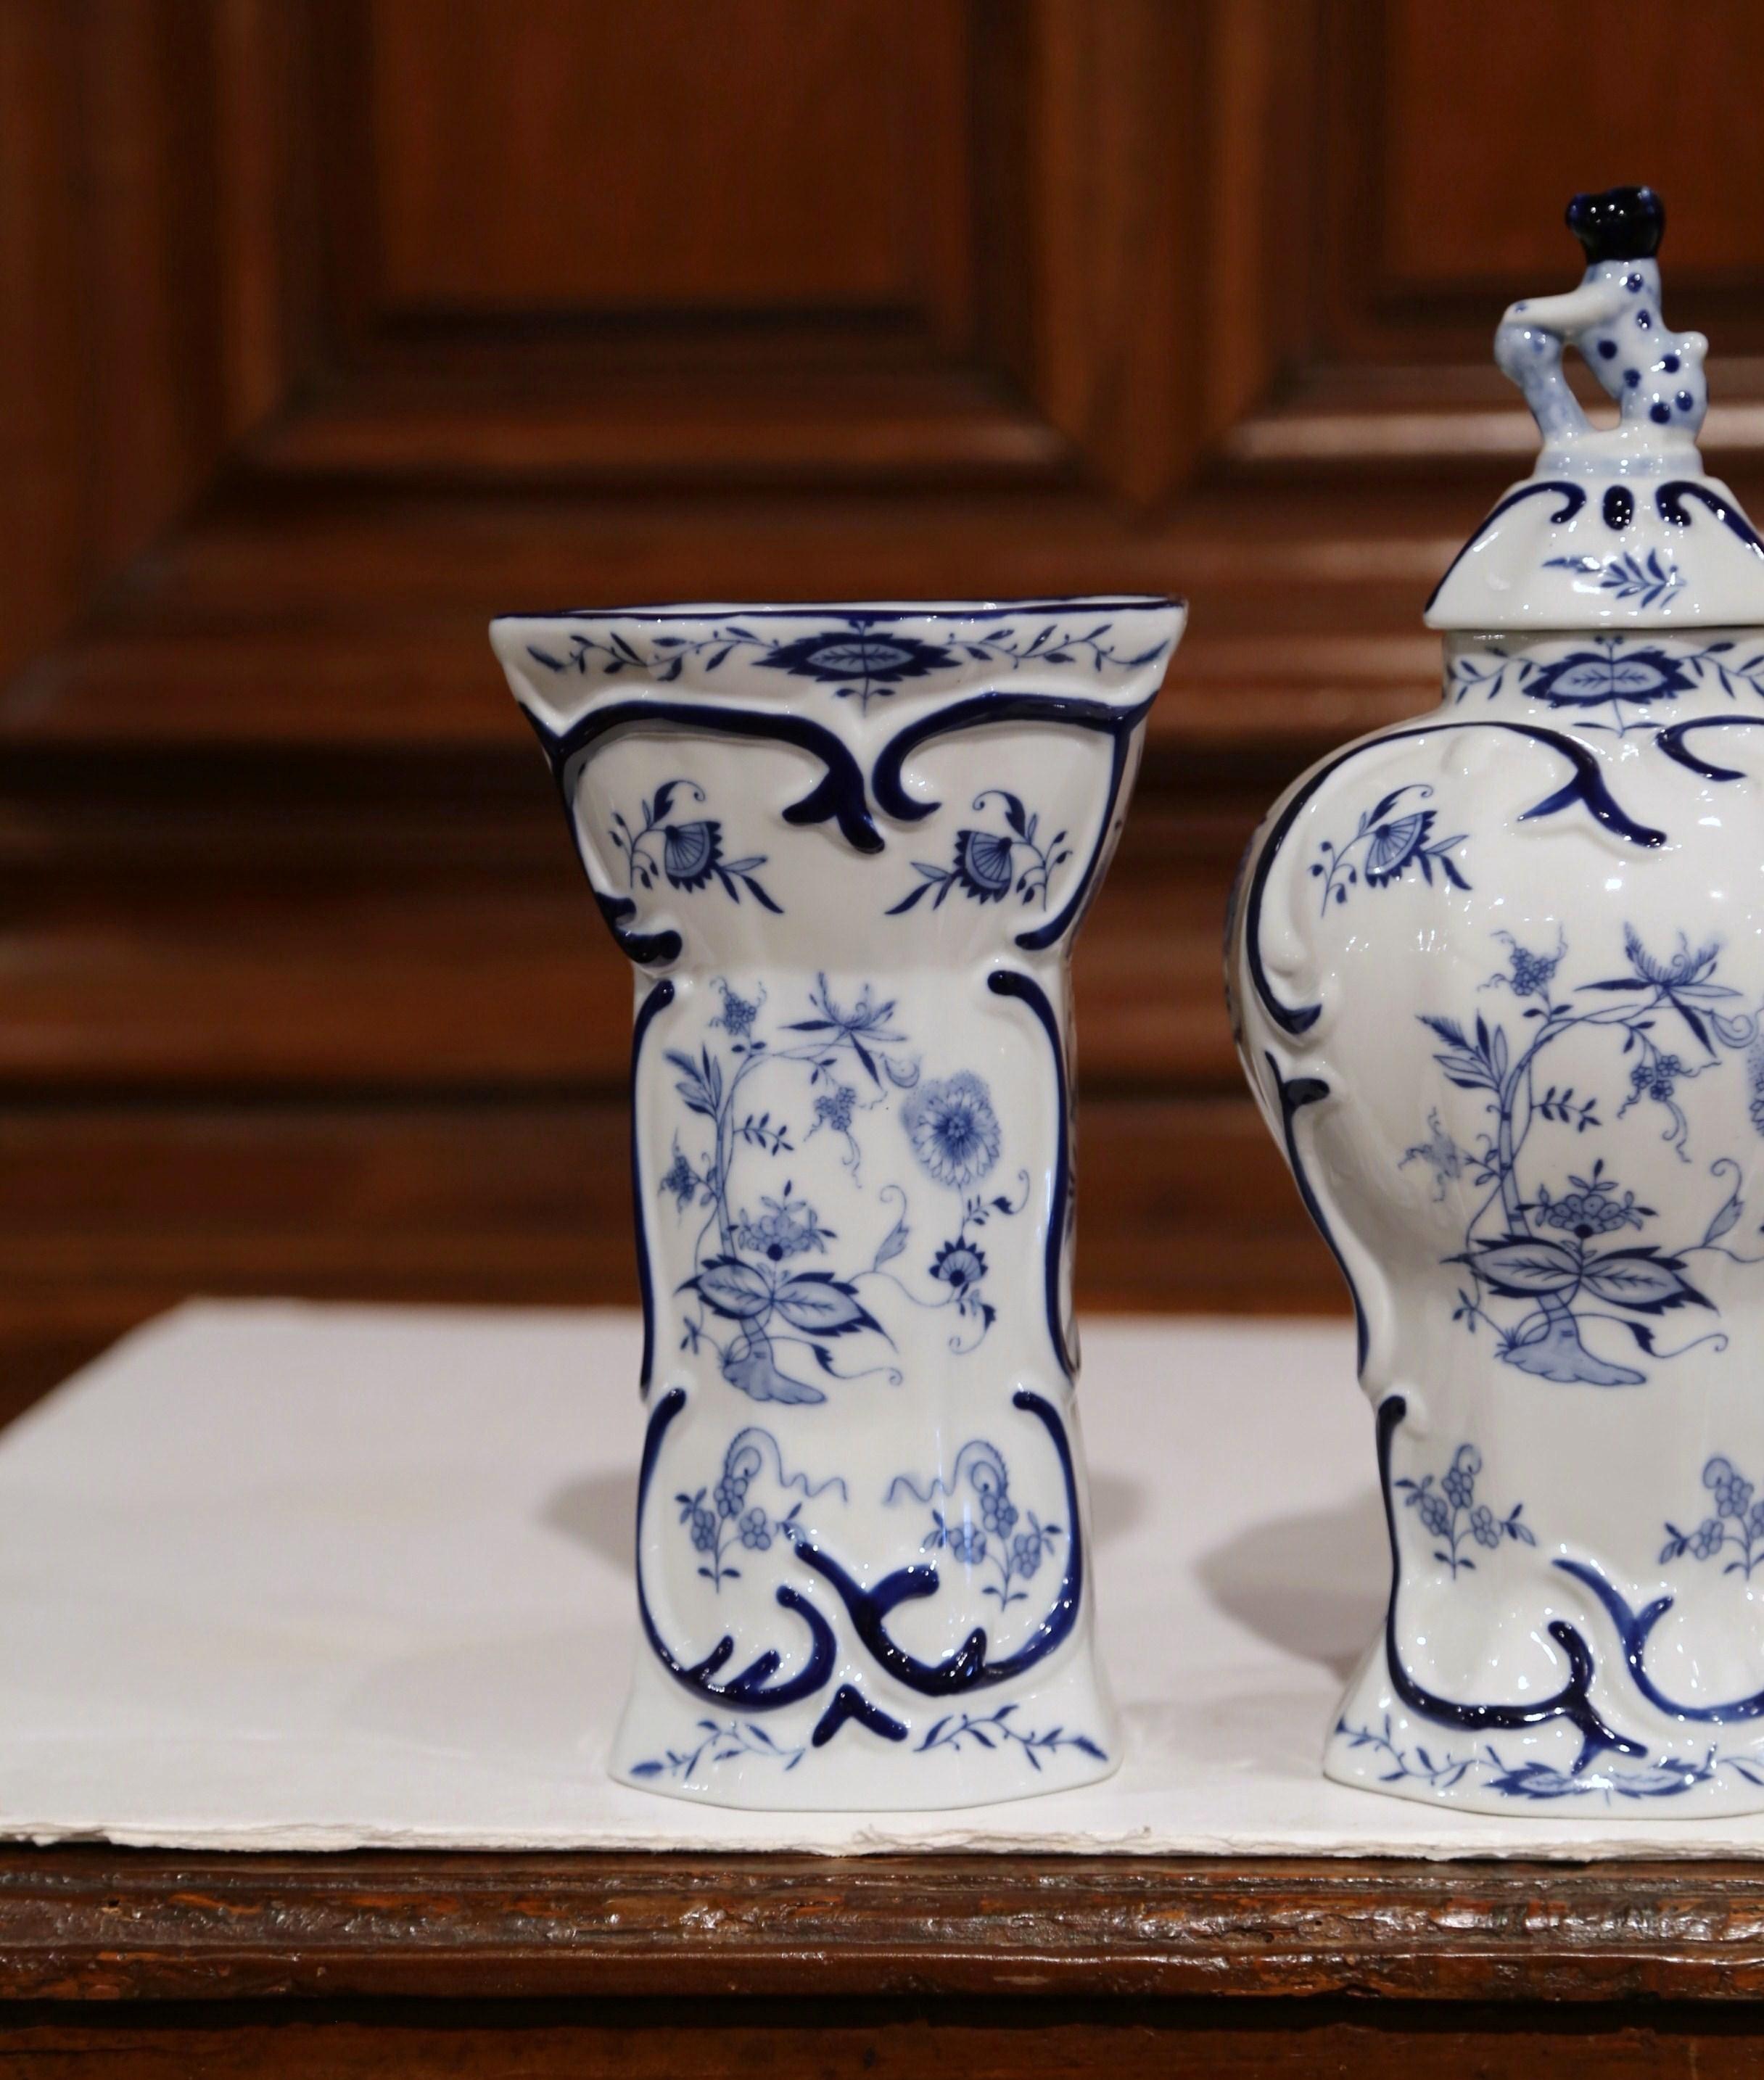 Decorate your mantel or your entryway console with this elegant set of Delft vases. Crafted, circa 1950, the set is made up of three, hand-painted pieces: two vases and a matching jar. All of the elements in the set are decorated with classic floral